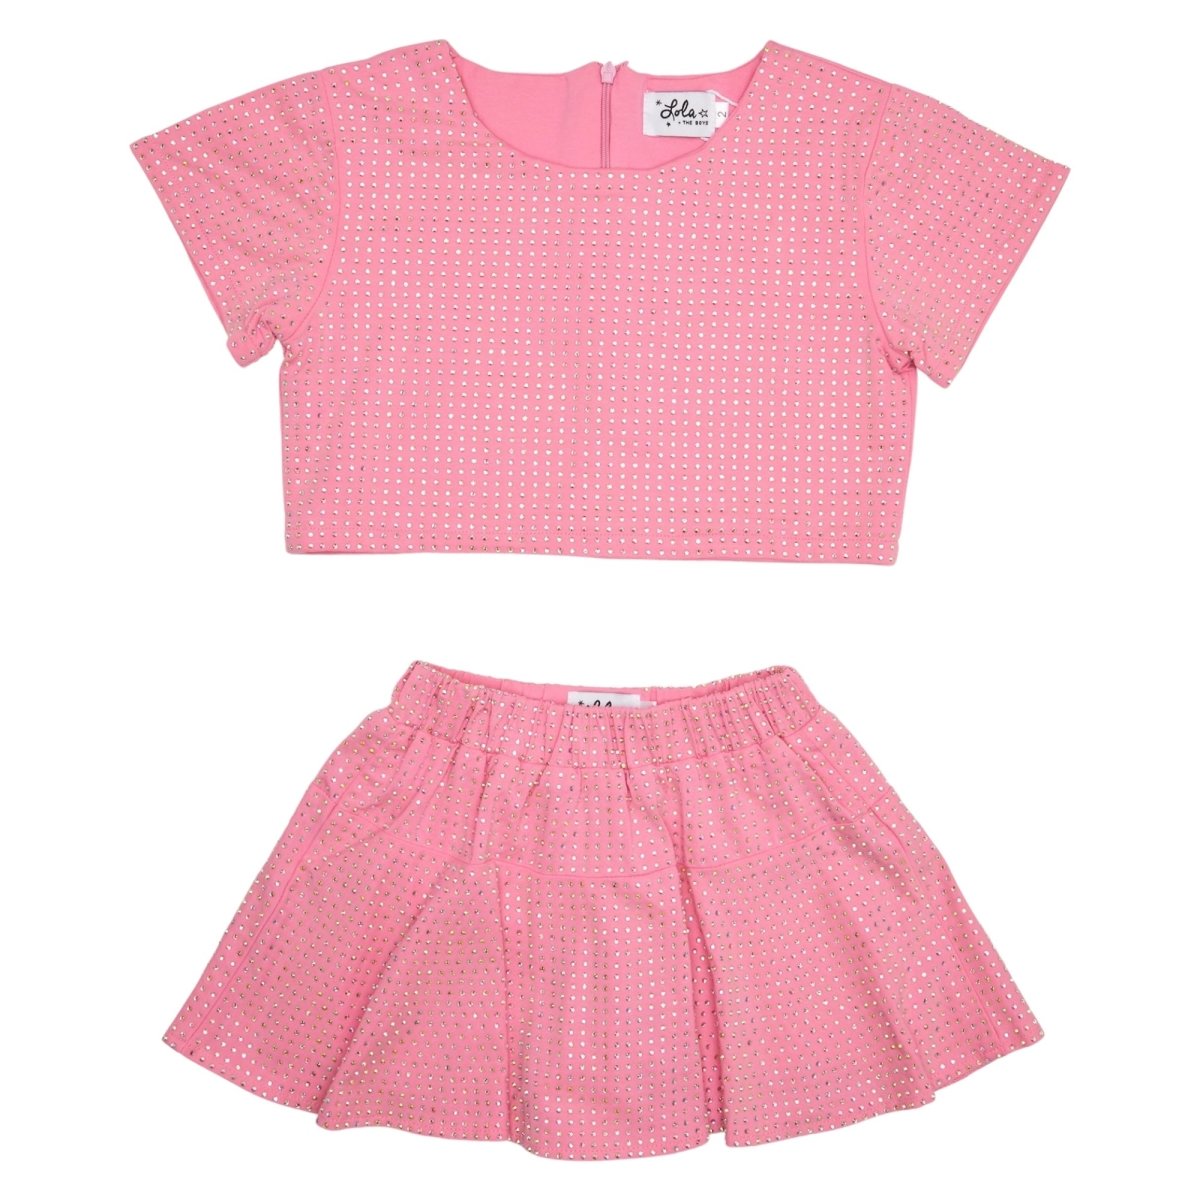 TAYLOR CRYSTAL CROP TOP AND SKIRTS SET - LOLA AND THE BOYS